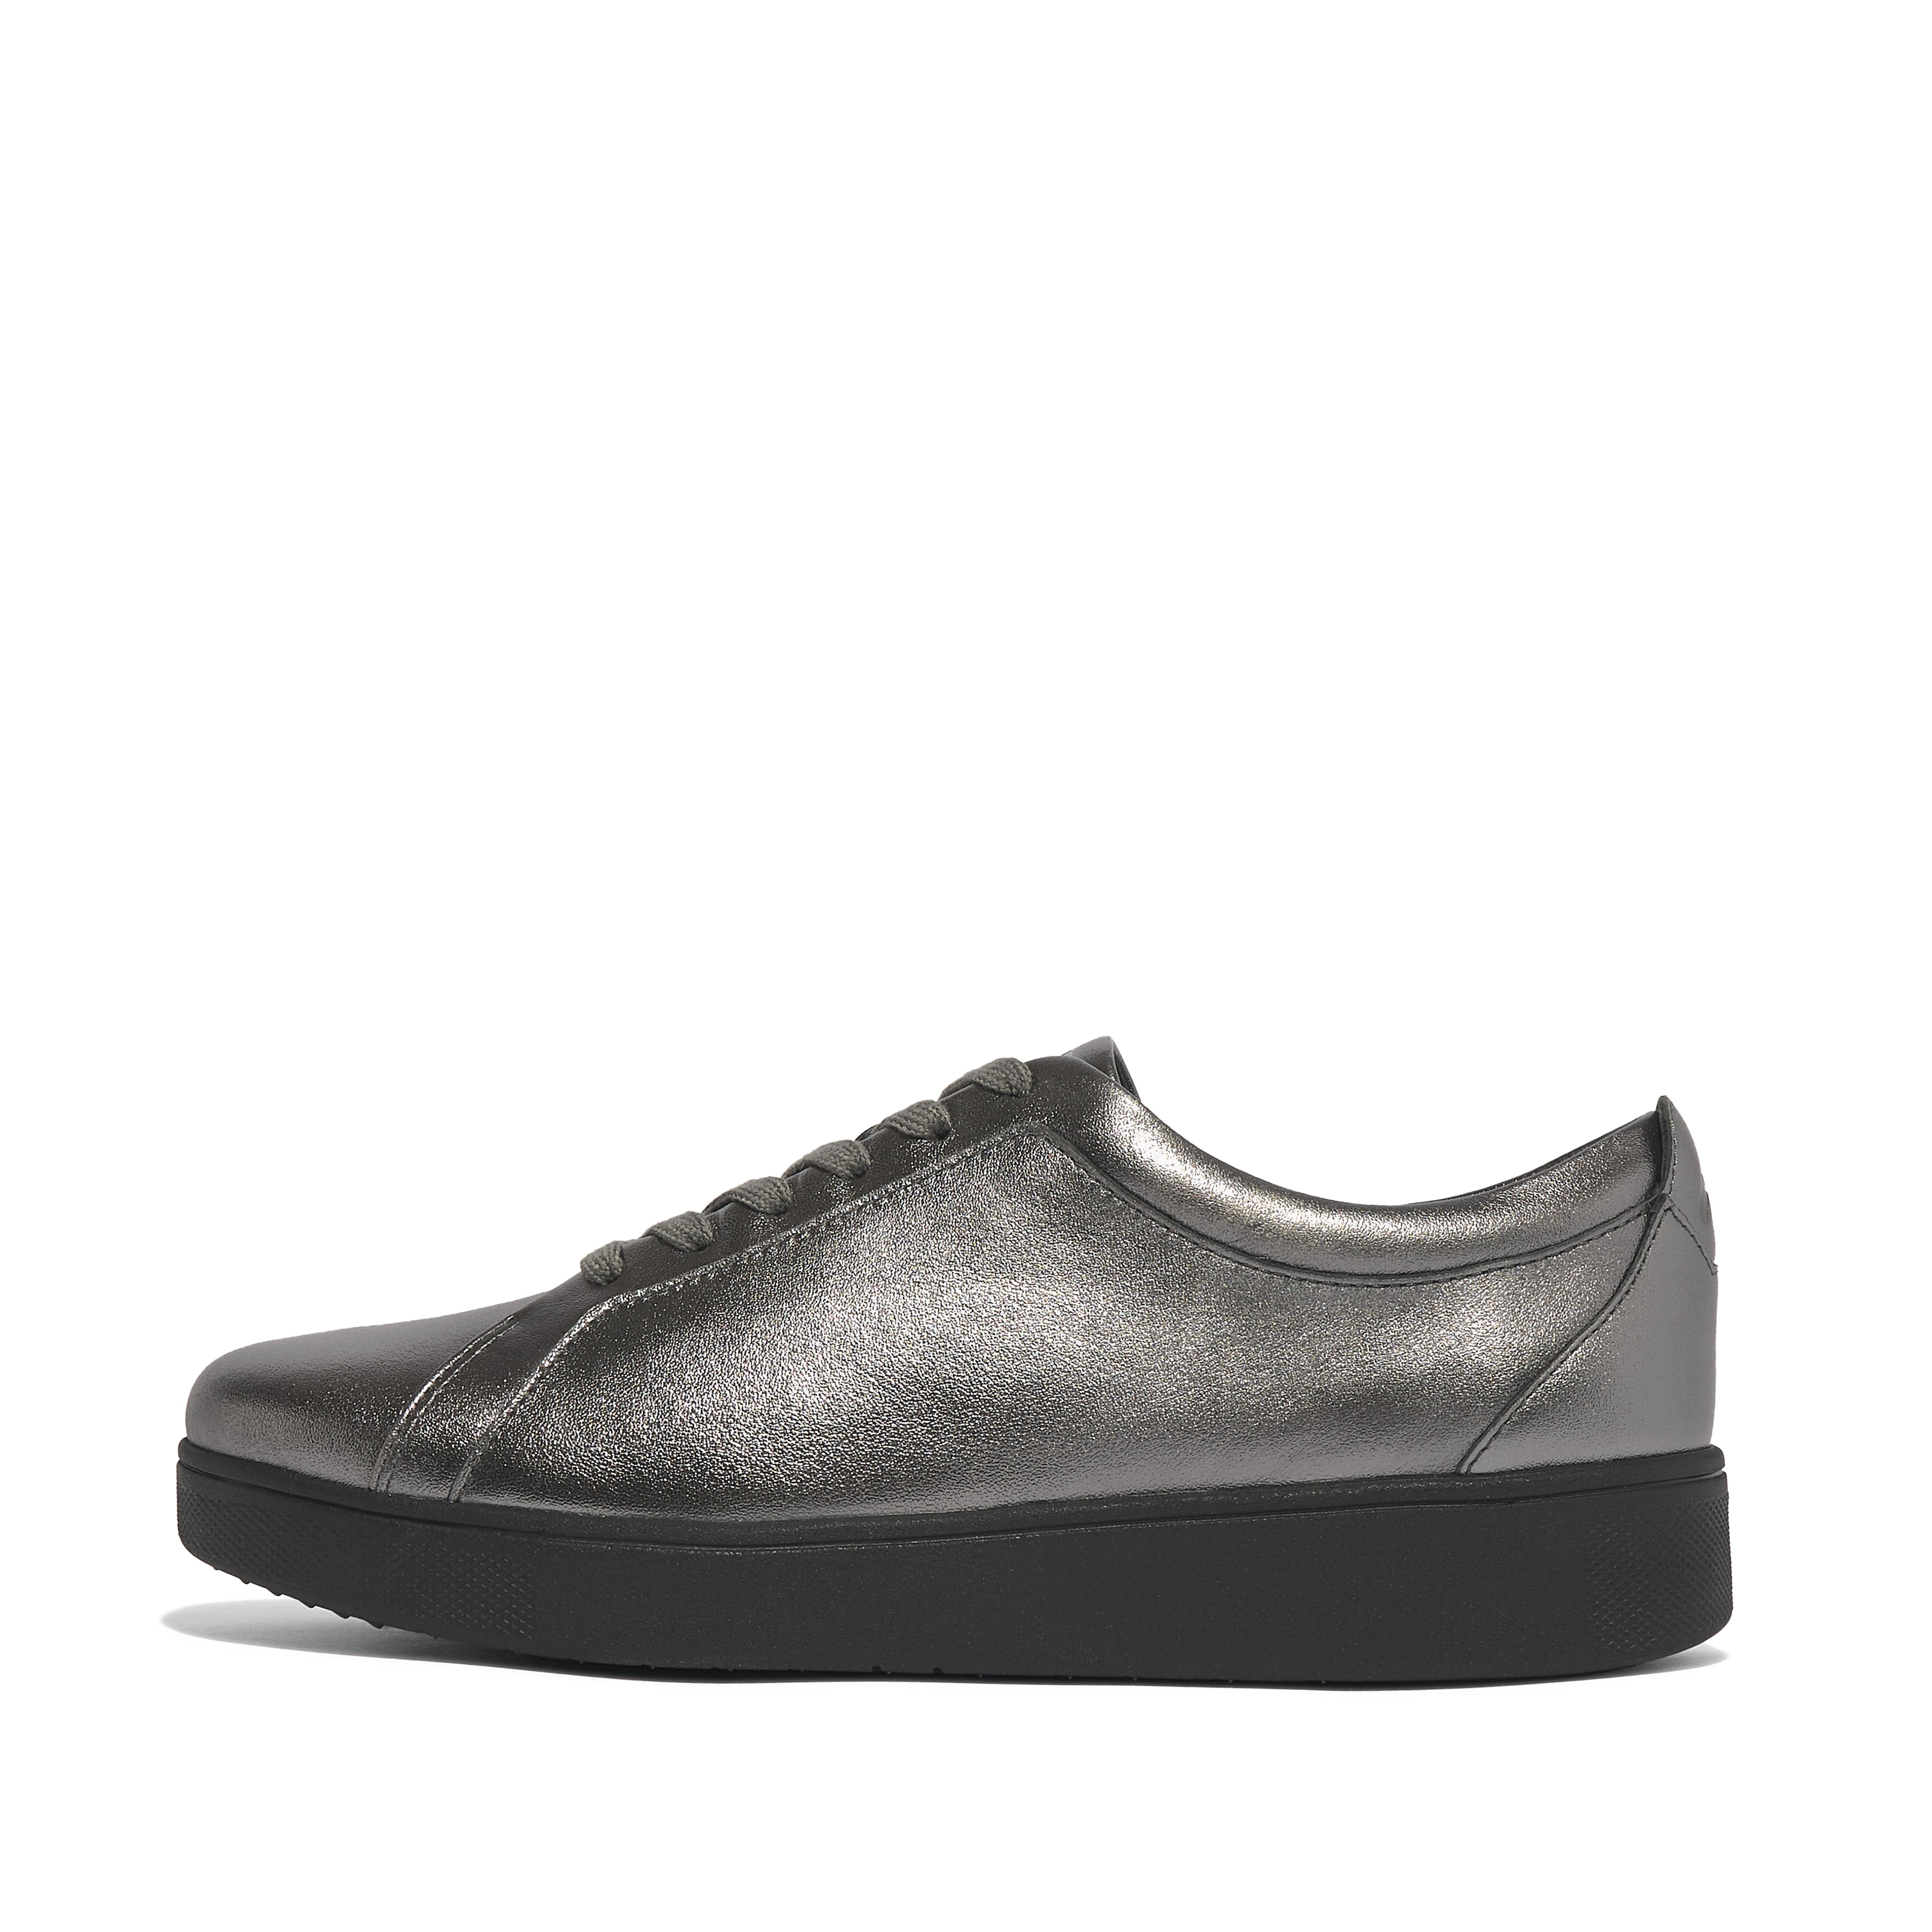 Fitflop Metallic Leather Sneakers,Pewter Mix